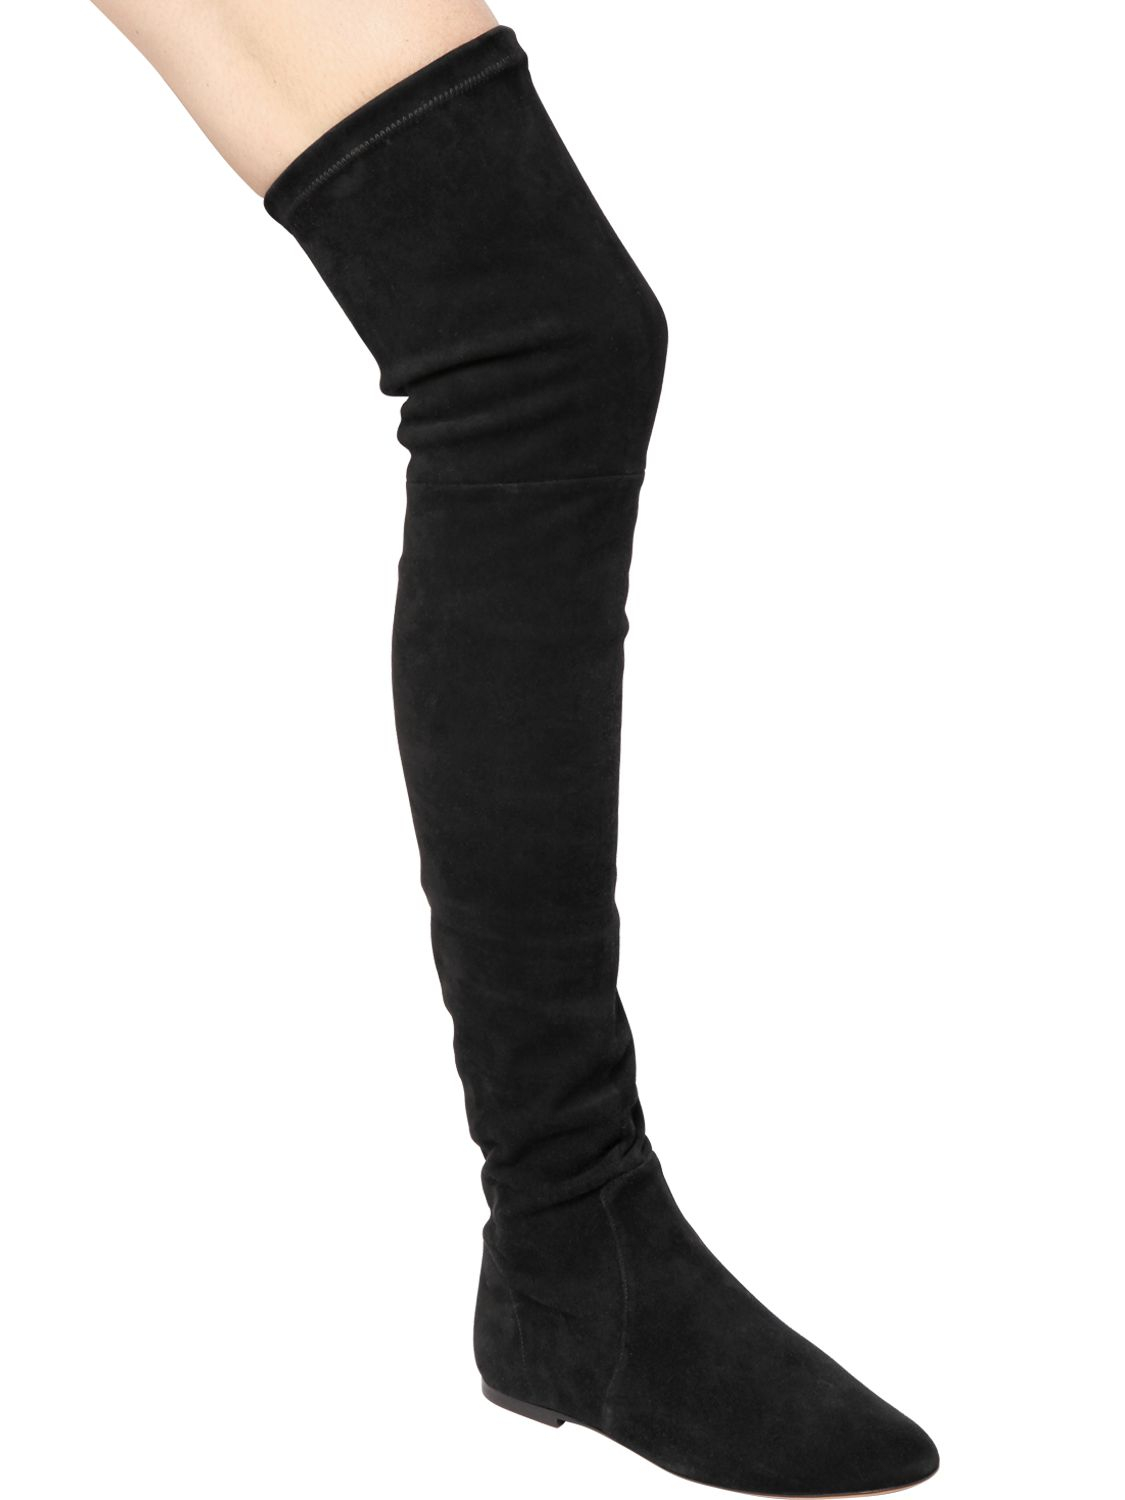 Lyst - Isabel marant Brenna Suede Over-the-knee Boots in Black